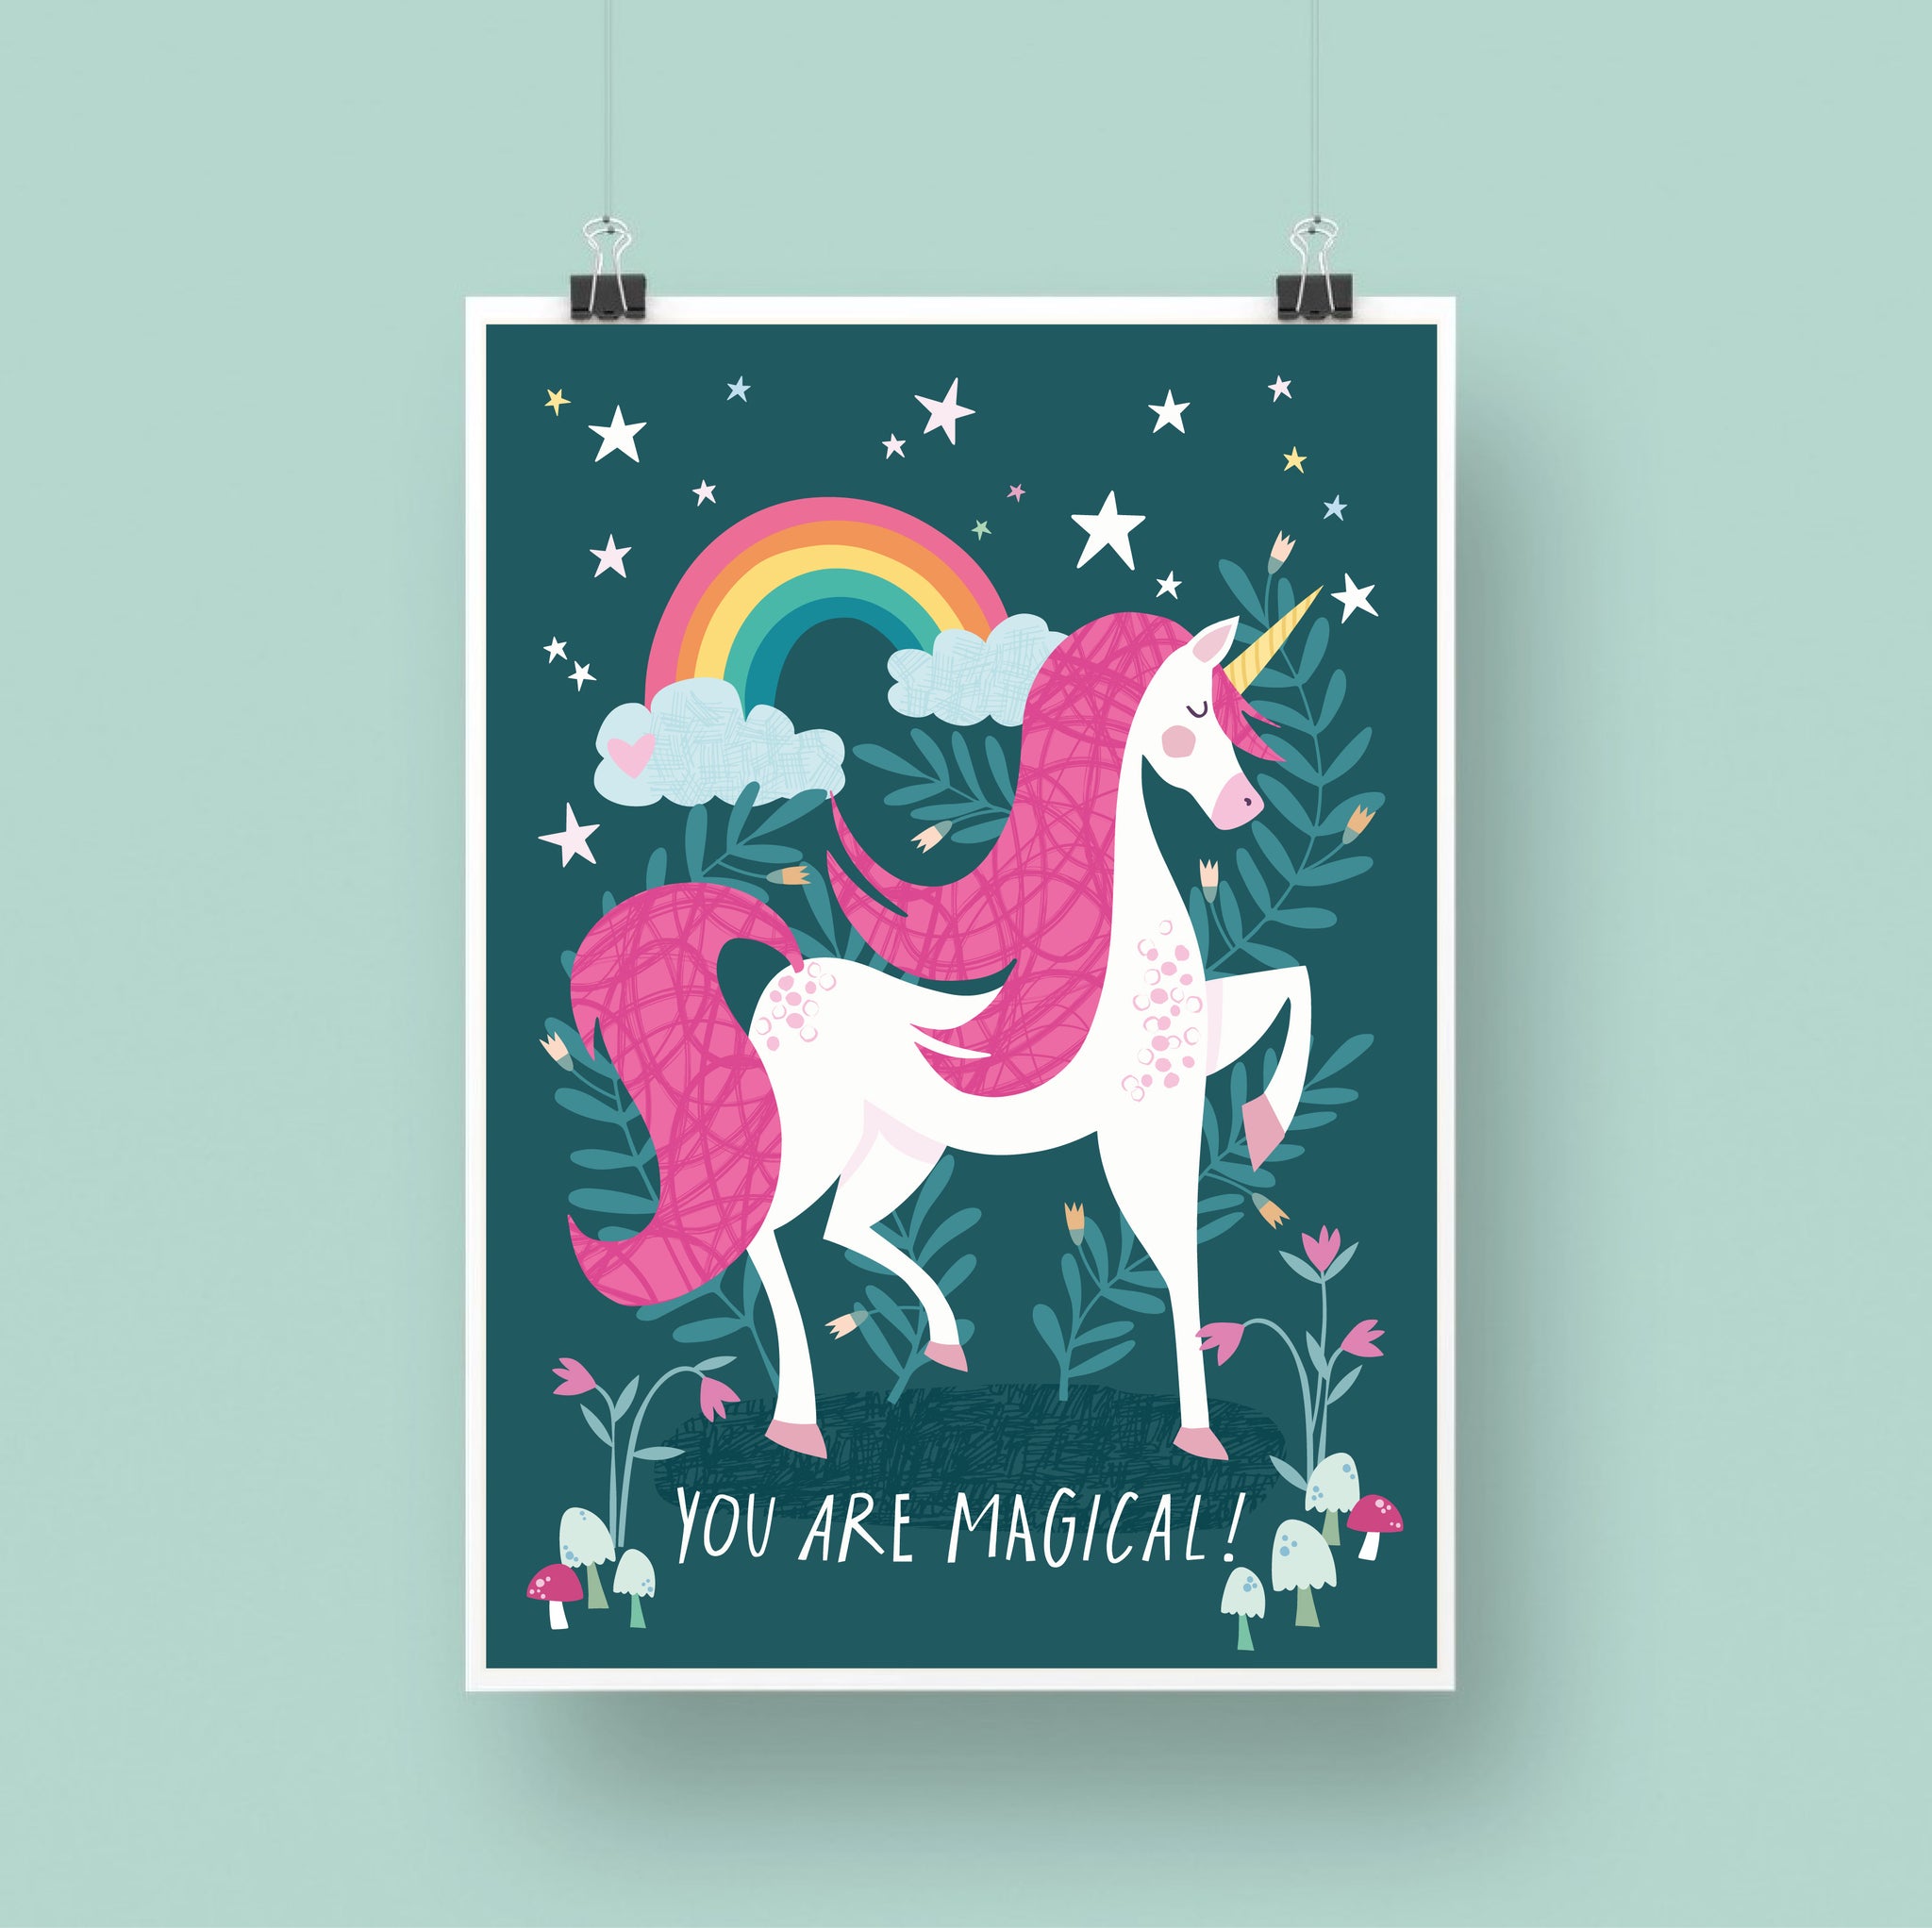 'You Are Magical' Art Print